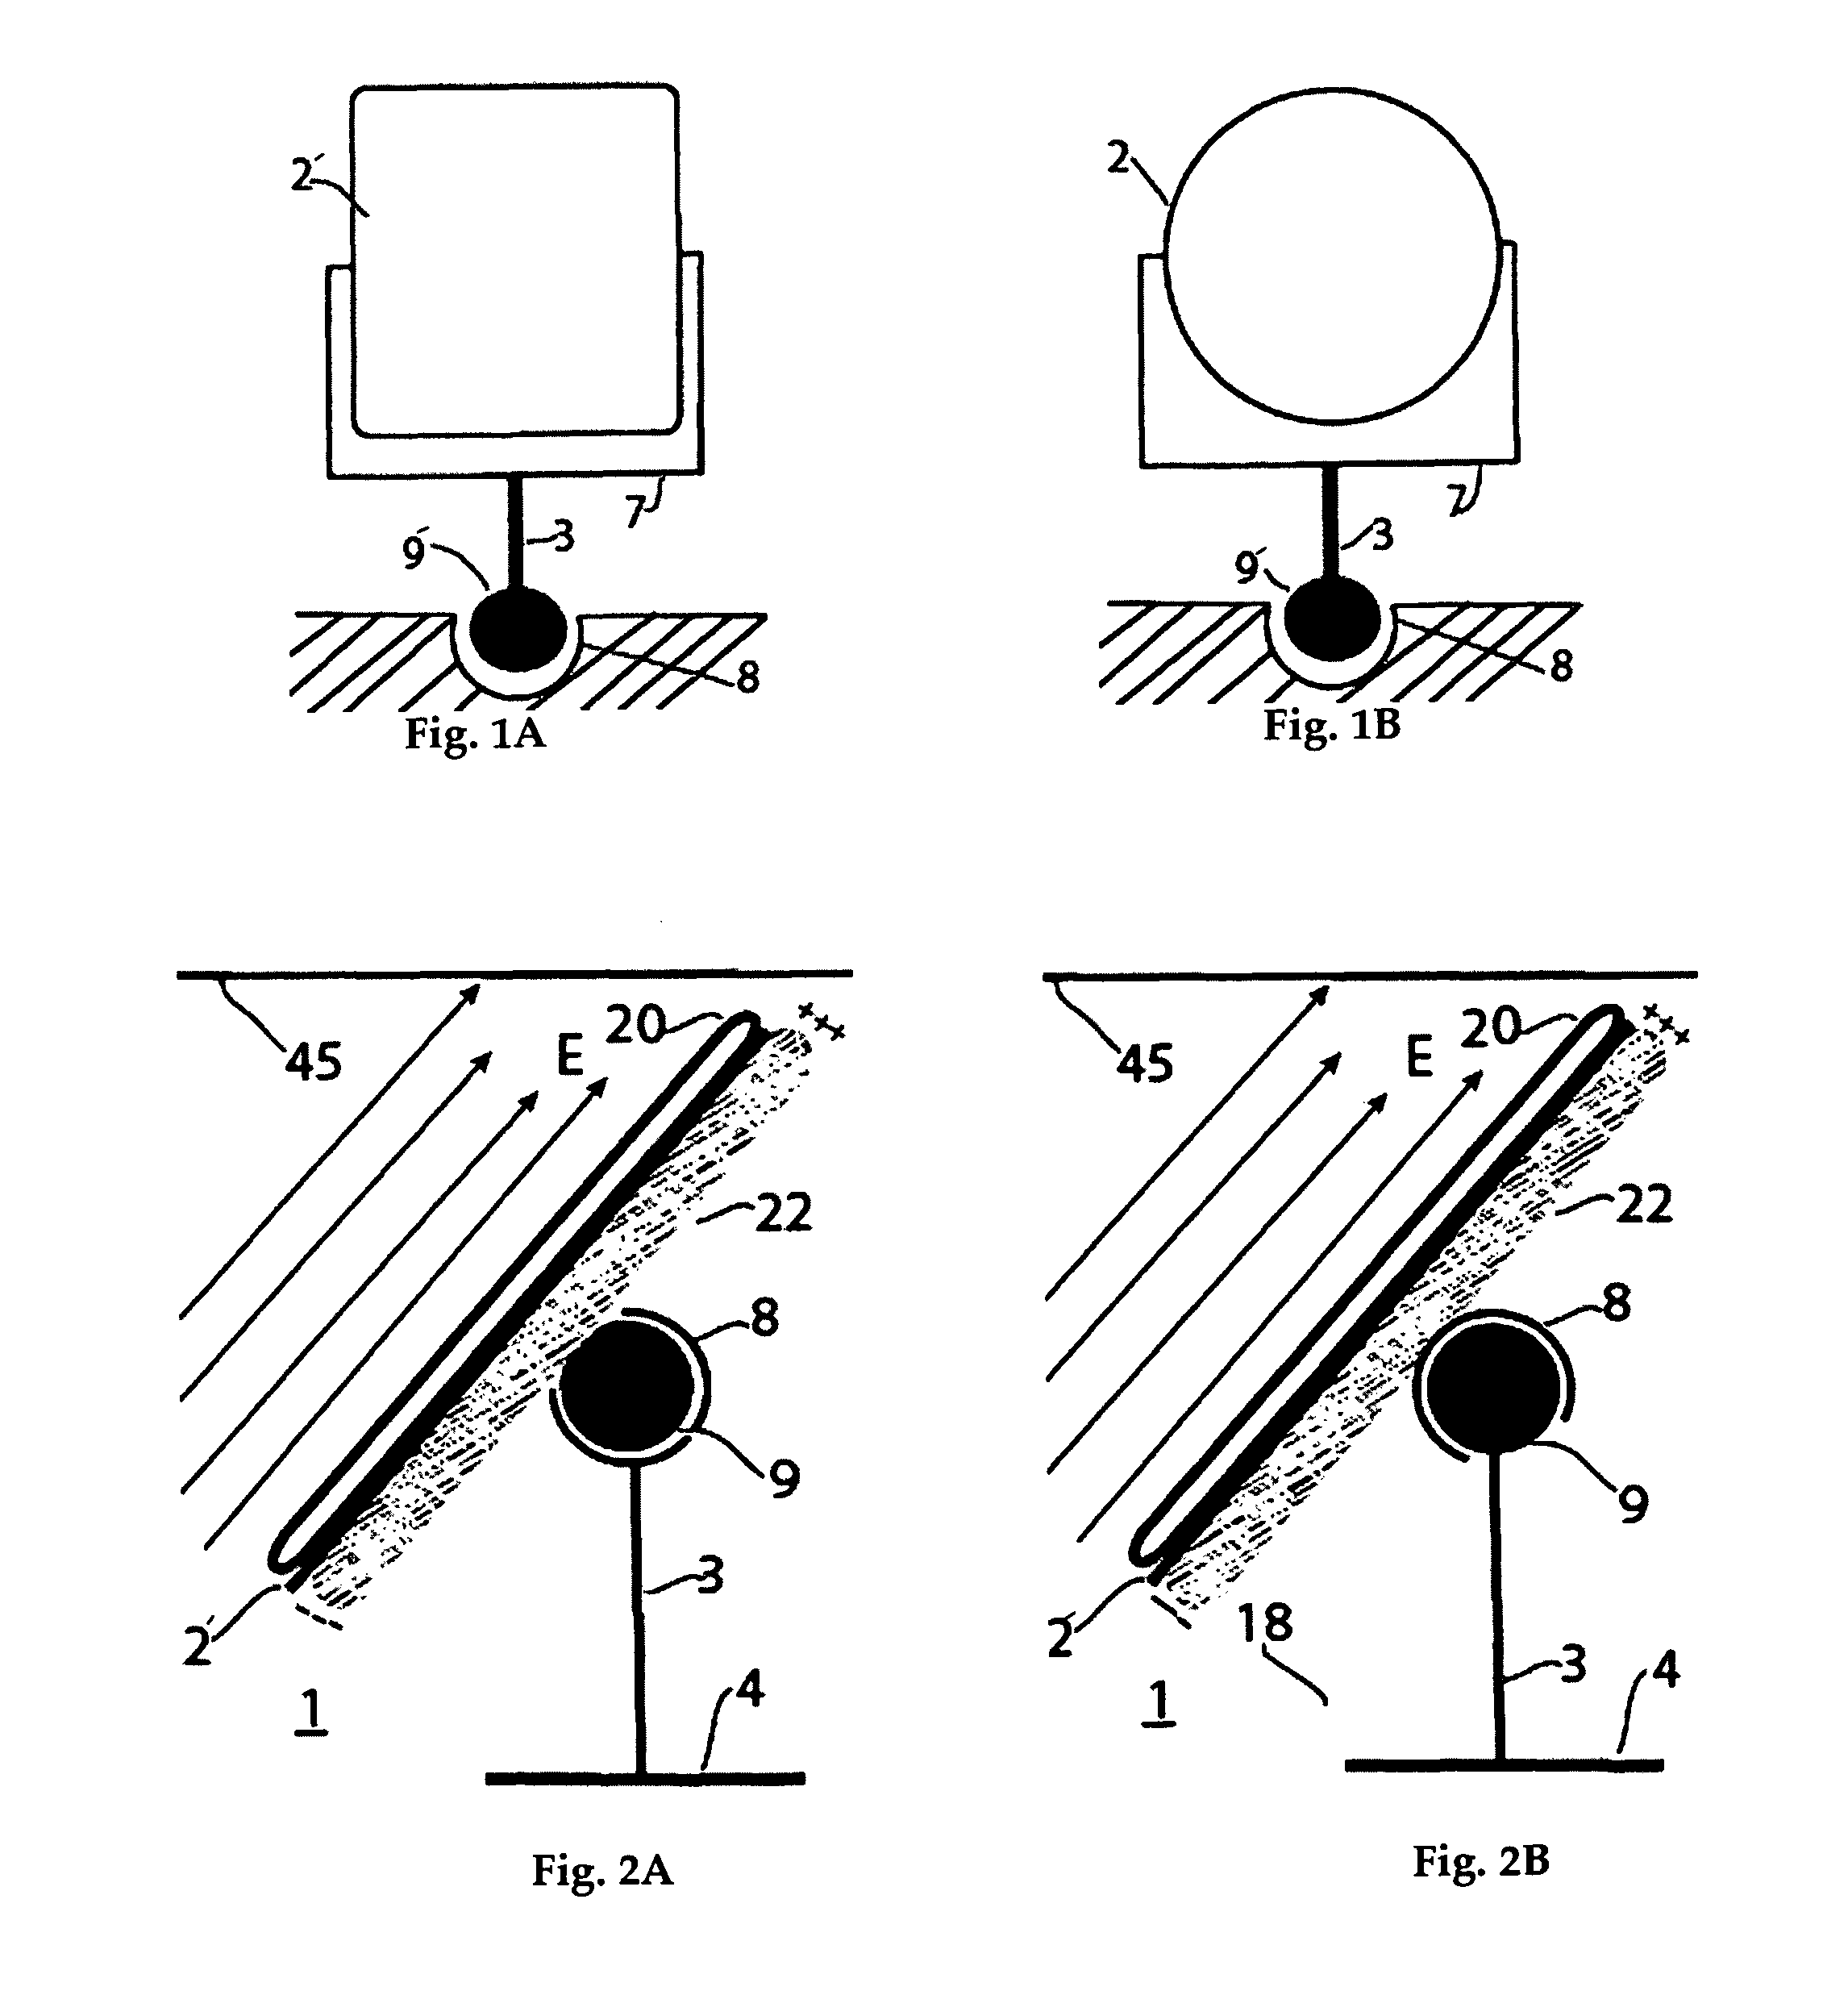 Fresnel solar concentrator array with centered universal pivots